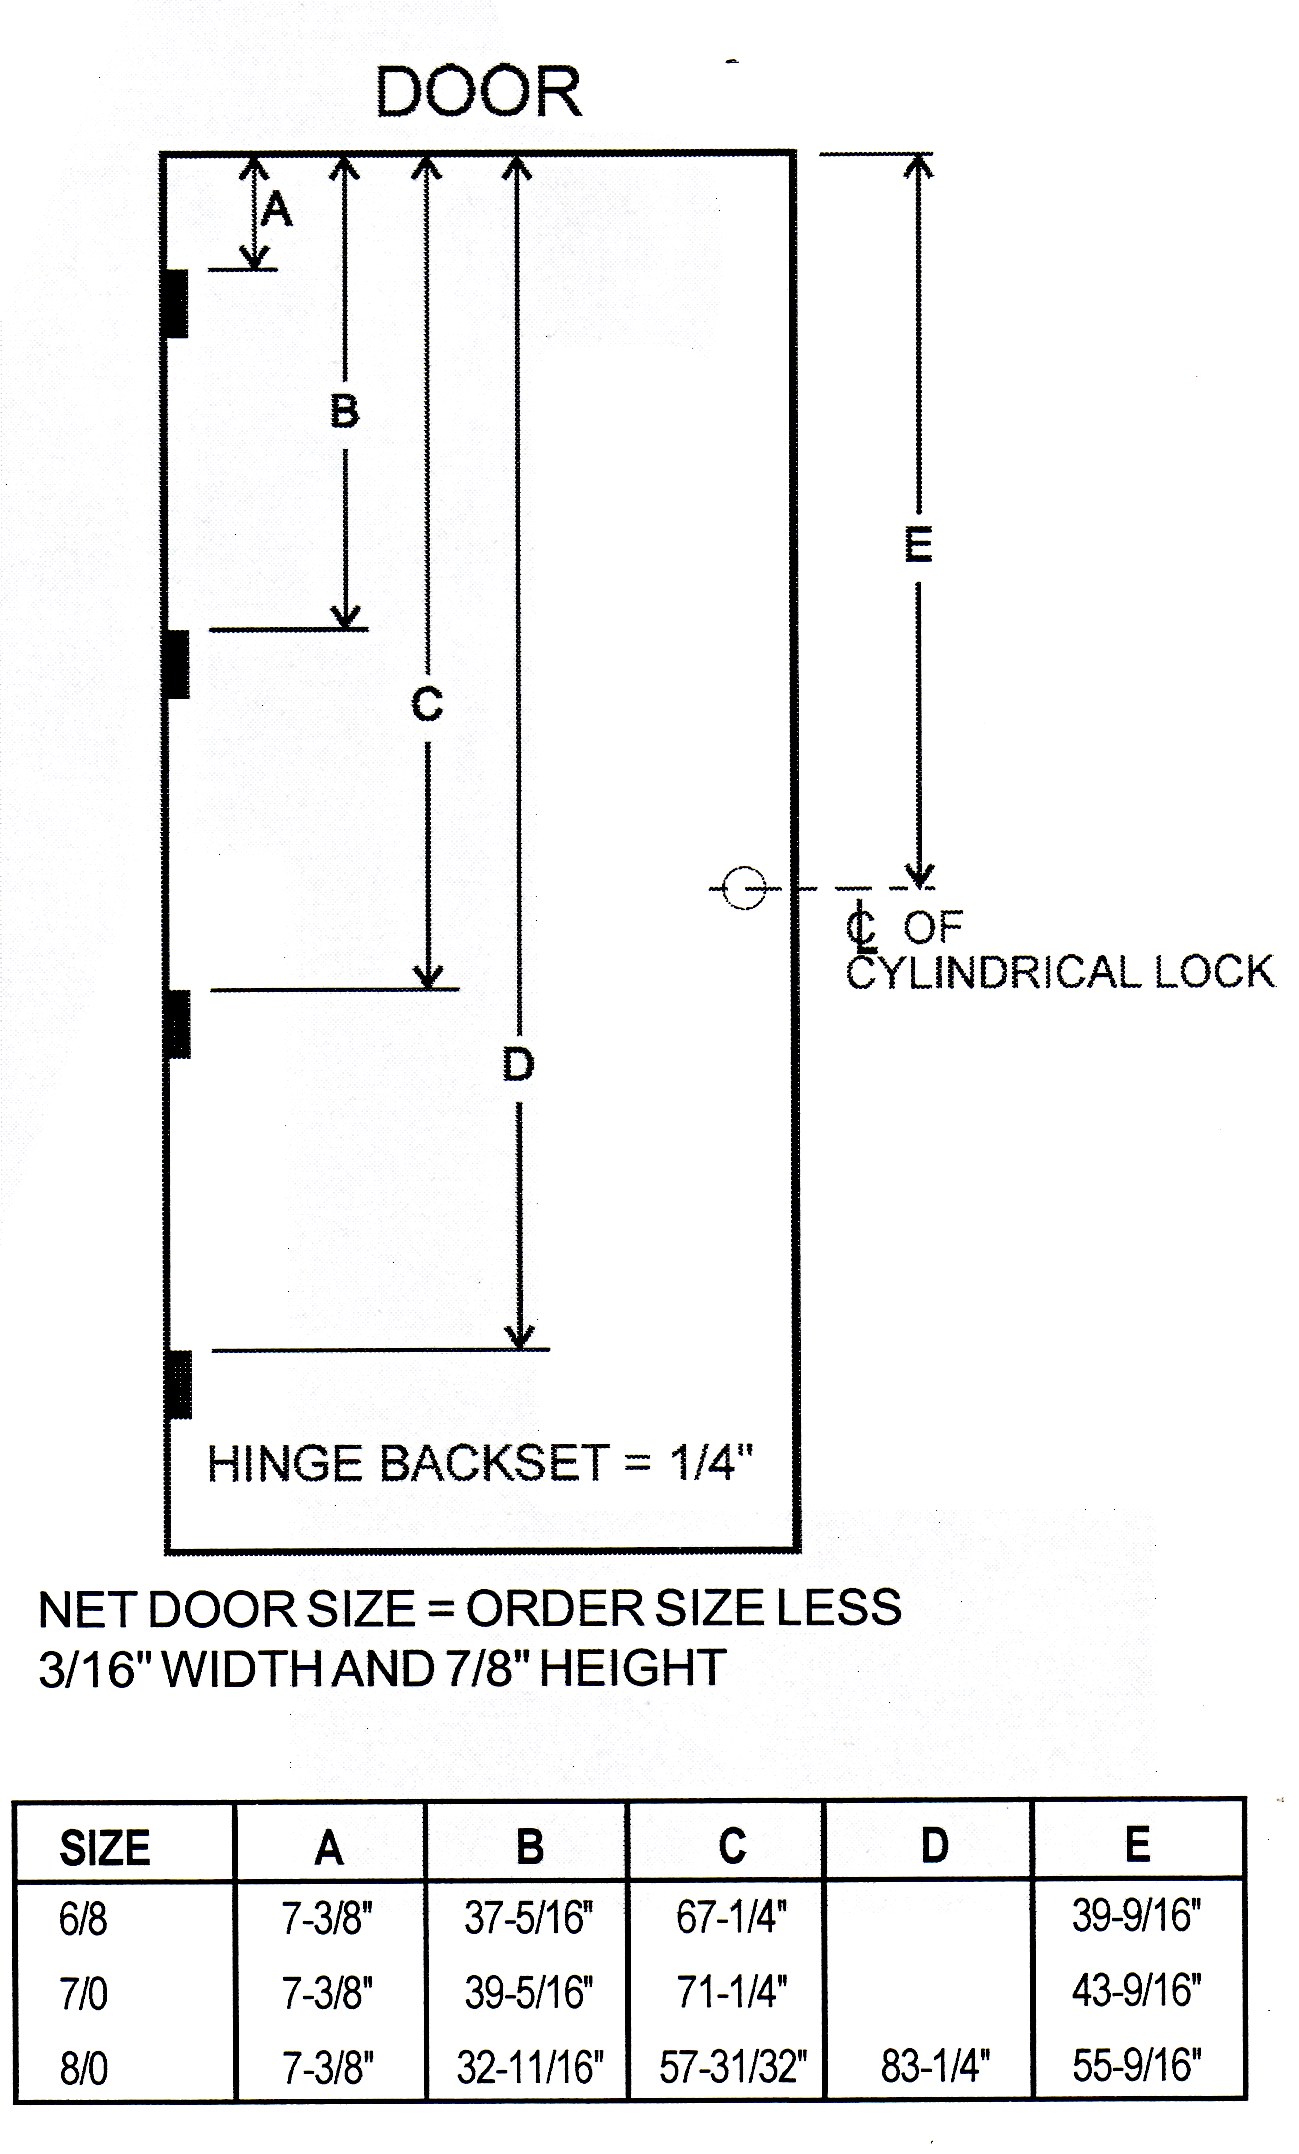 COMMERCIAL HOLLOW METAL DOORS AND FRAMES